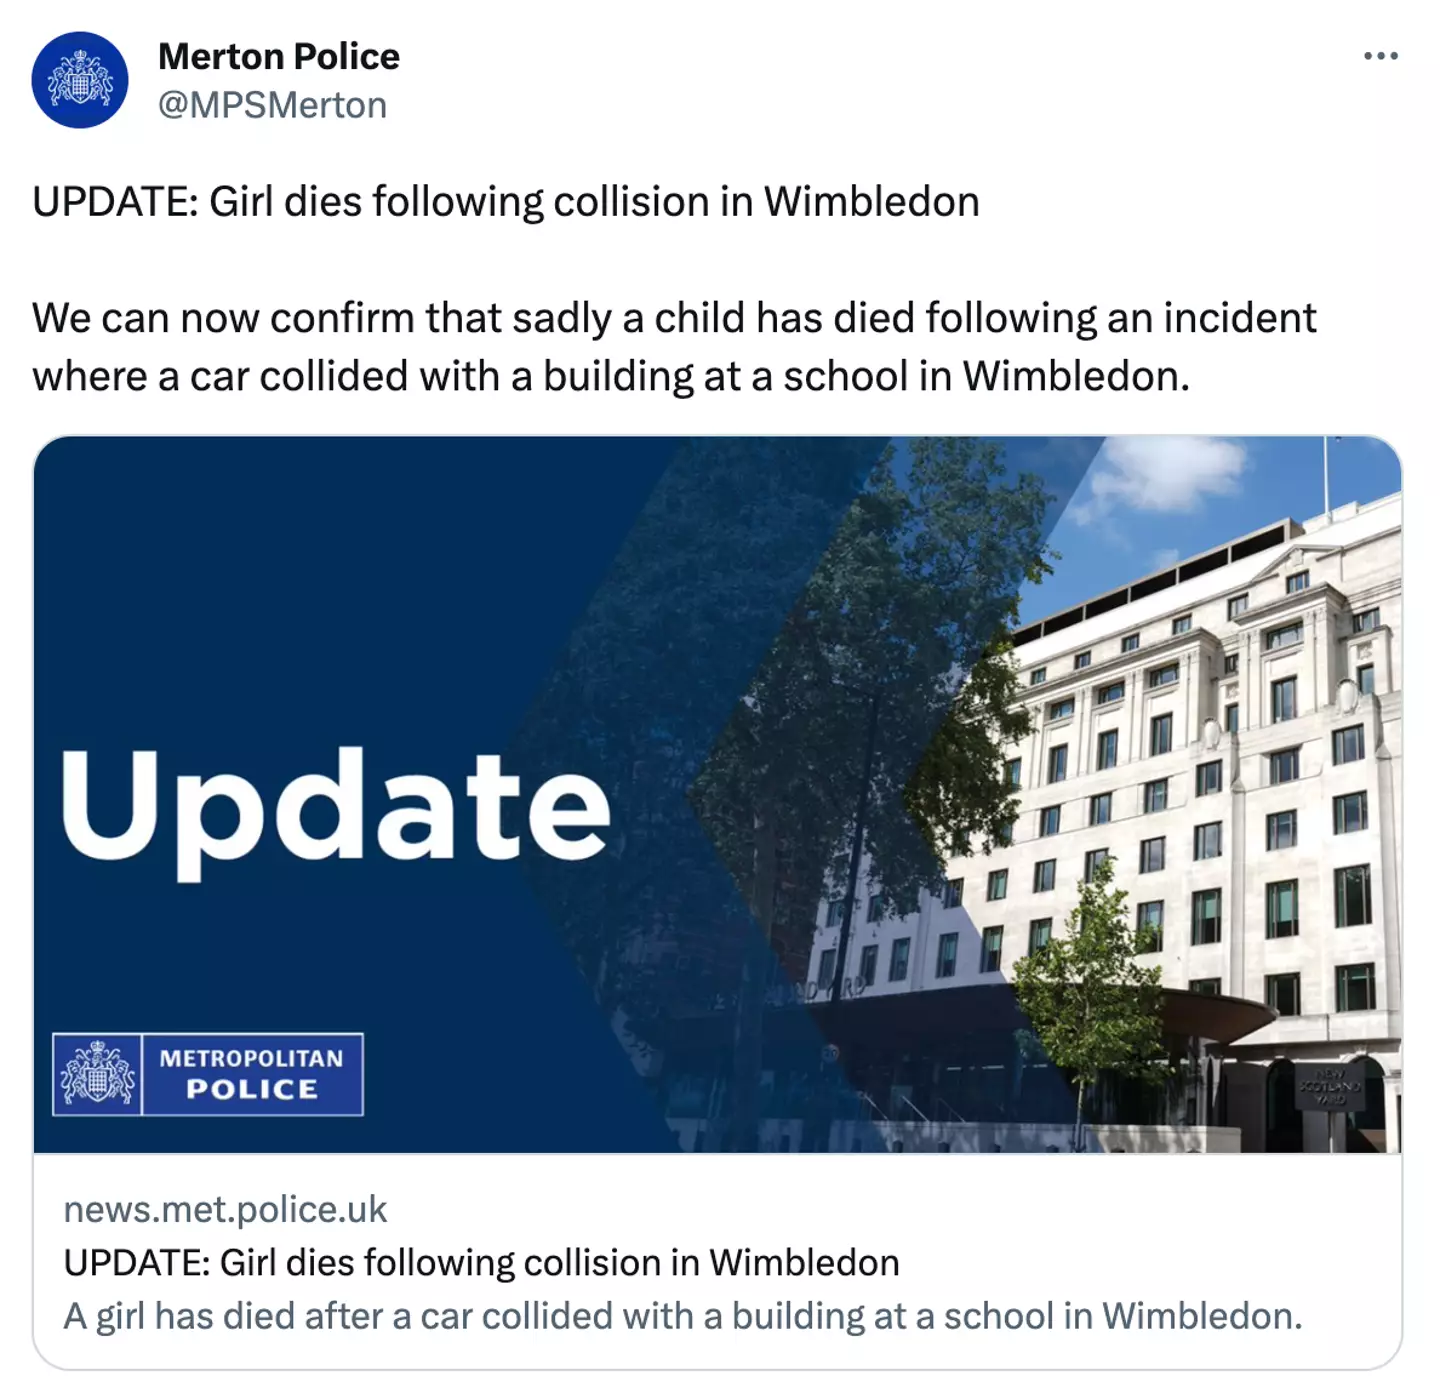 Merton Police confirmed the news this afternoon.